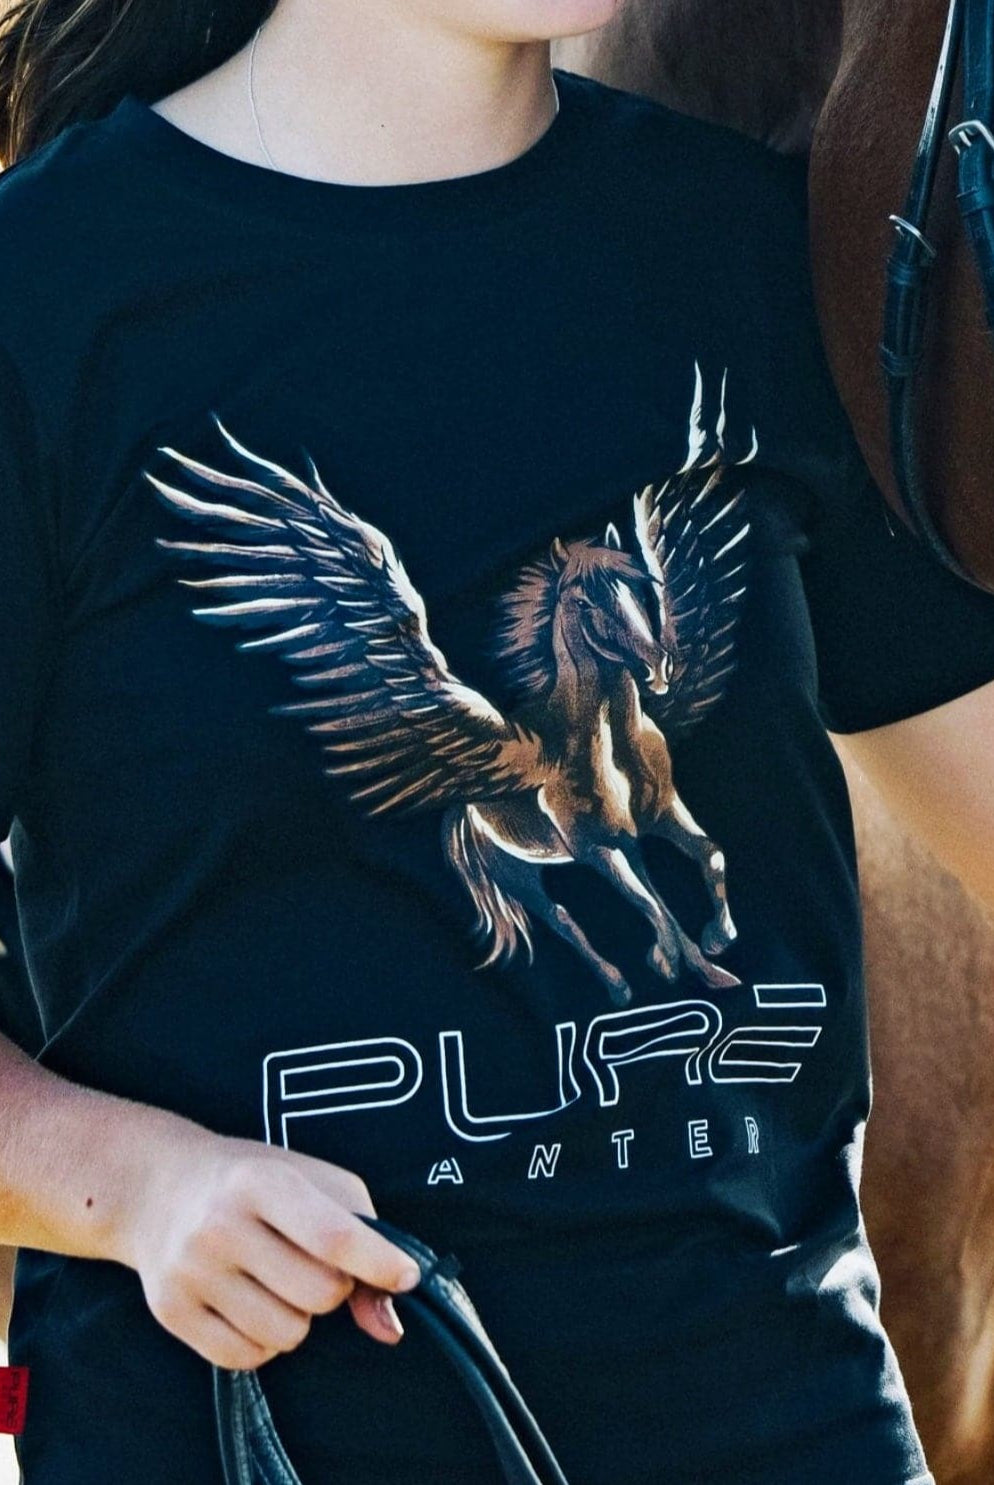 A person wearing a black t-shirt with a detailed graphic of a winged horse and the text "PURE" and "ANTER." The Youth PURE Wings Tee, a product from Pure Canter Pty Ltd, featuring a statement design, runs very small. The individual holds the reins of a brown horse standing beside them. Both are partially visible, suggesting an outdoor environment.